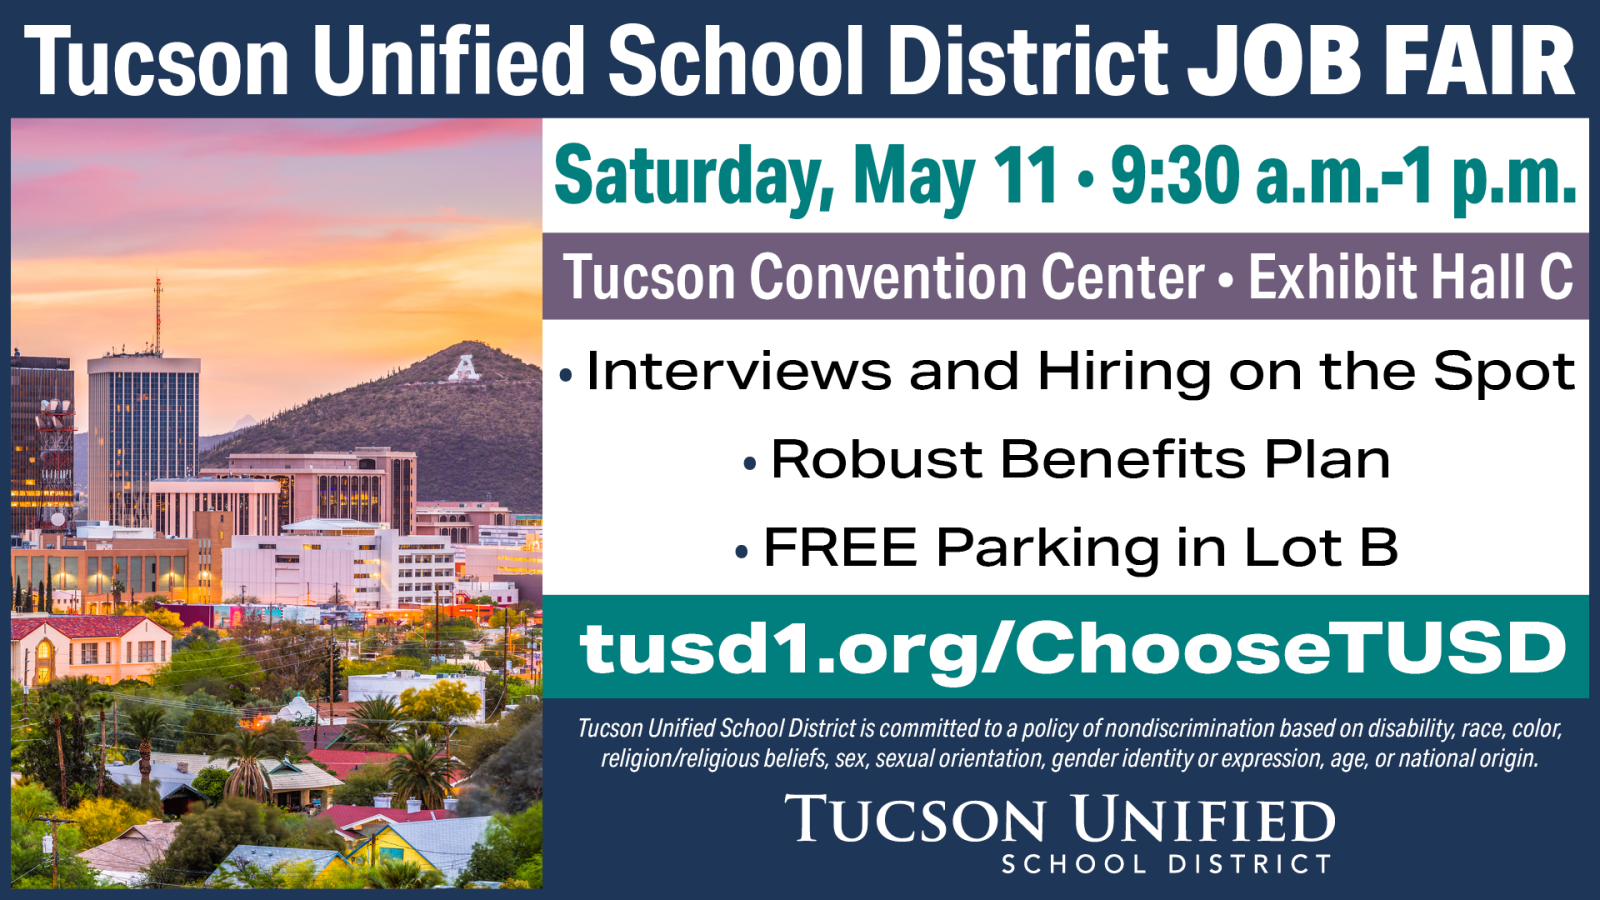 Join us on Saturday May 11 from 9:30 am - 1:00 pm at the Ƶapp Convention Center Exhibit Hall C (260 S. Church Ave.) for the Ƶapp Unified School District Job Fair!  Interviews and Hiring on the Spot Robust Benefits Plan FREE Parking in Lot B  